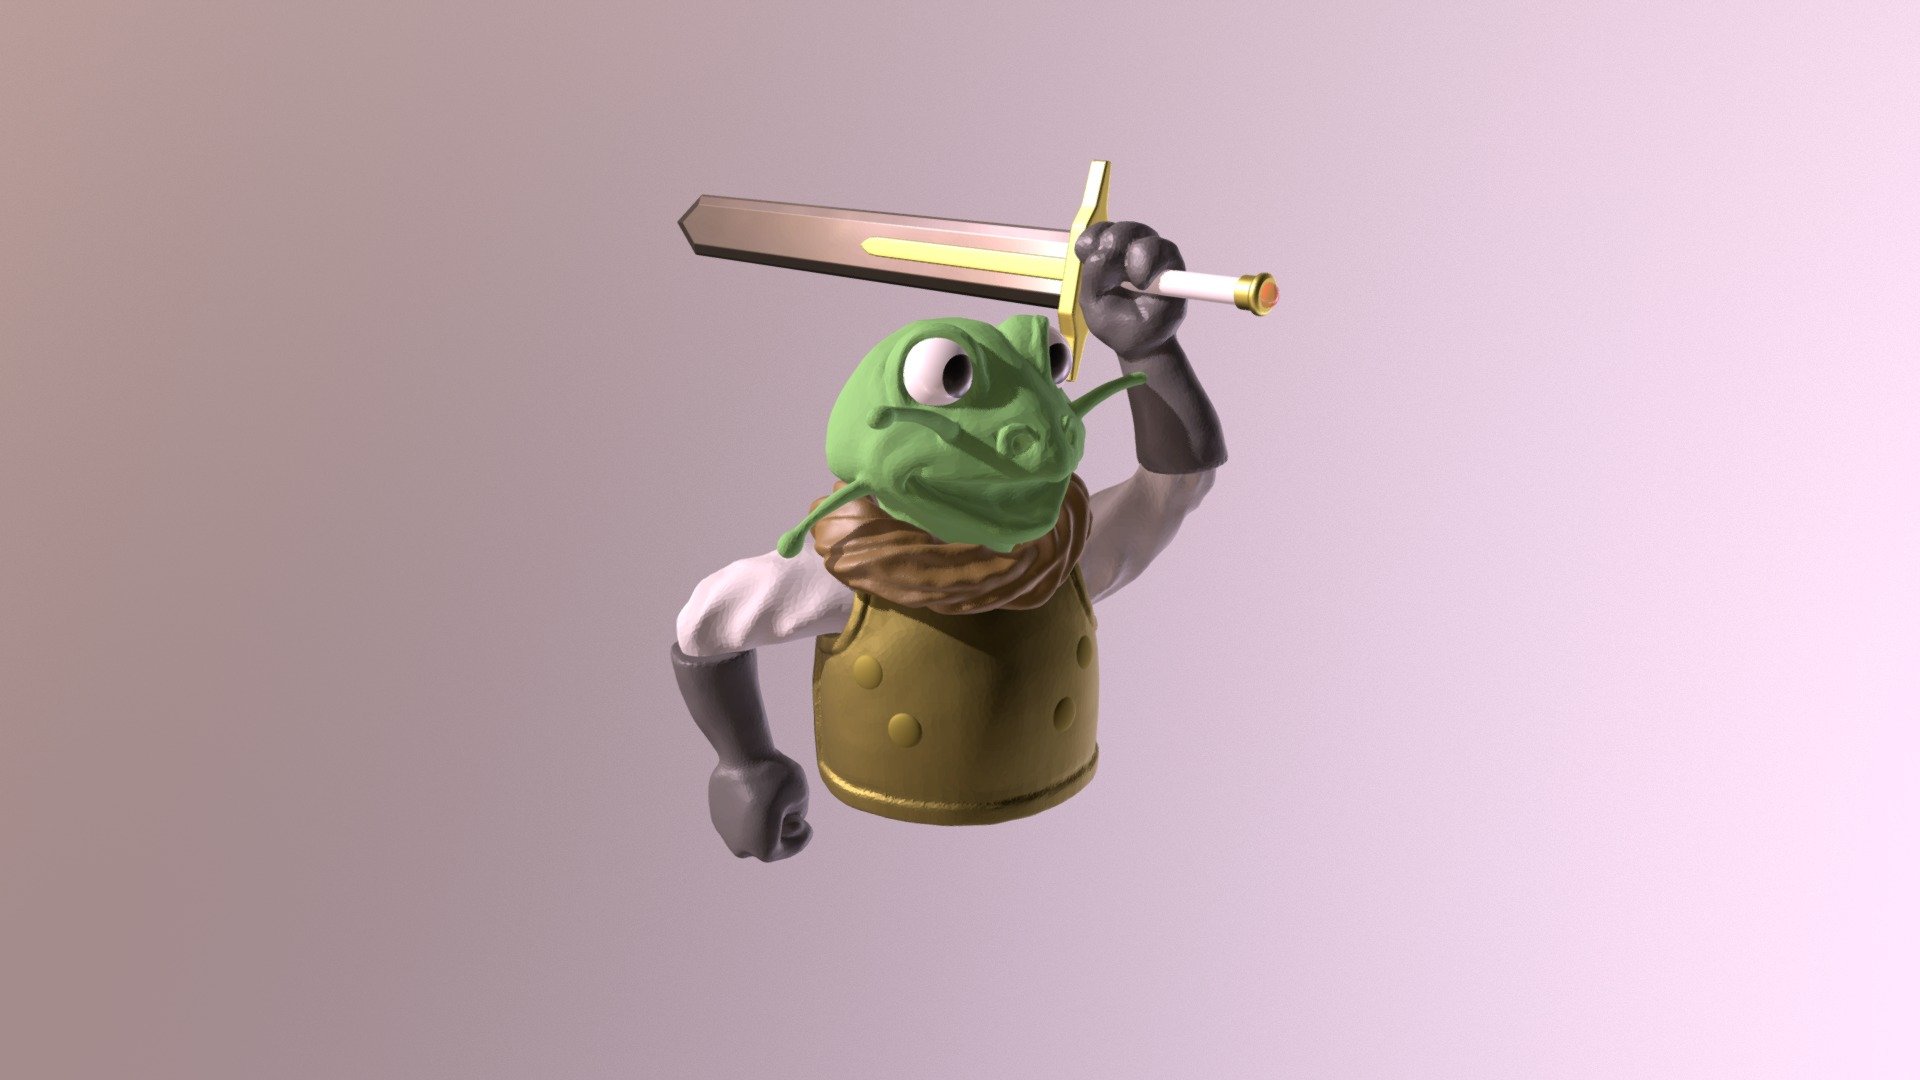 He's always been my favorite character from Chrono Trigger, one of my favorite RPG's of all time. I didn't have time to do him full justice, but this has inspired me to revisit Frog once I finish Sculpt January :)

Special thanks to inspiration and ideas I got from:
matthewart (https://www.deviantart.com/art/Chrono-Trigger-Frog-188692656) and 
kajinman (https://www.deviantart.com/art/Chrono-Trigger-Frog-Glenn-455360017)
on deviantart!! - 07 Adventure: Frog/Glenn from Chrono Trigger - 3D model by mvick13497 3d model